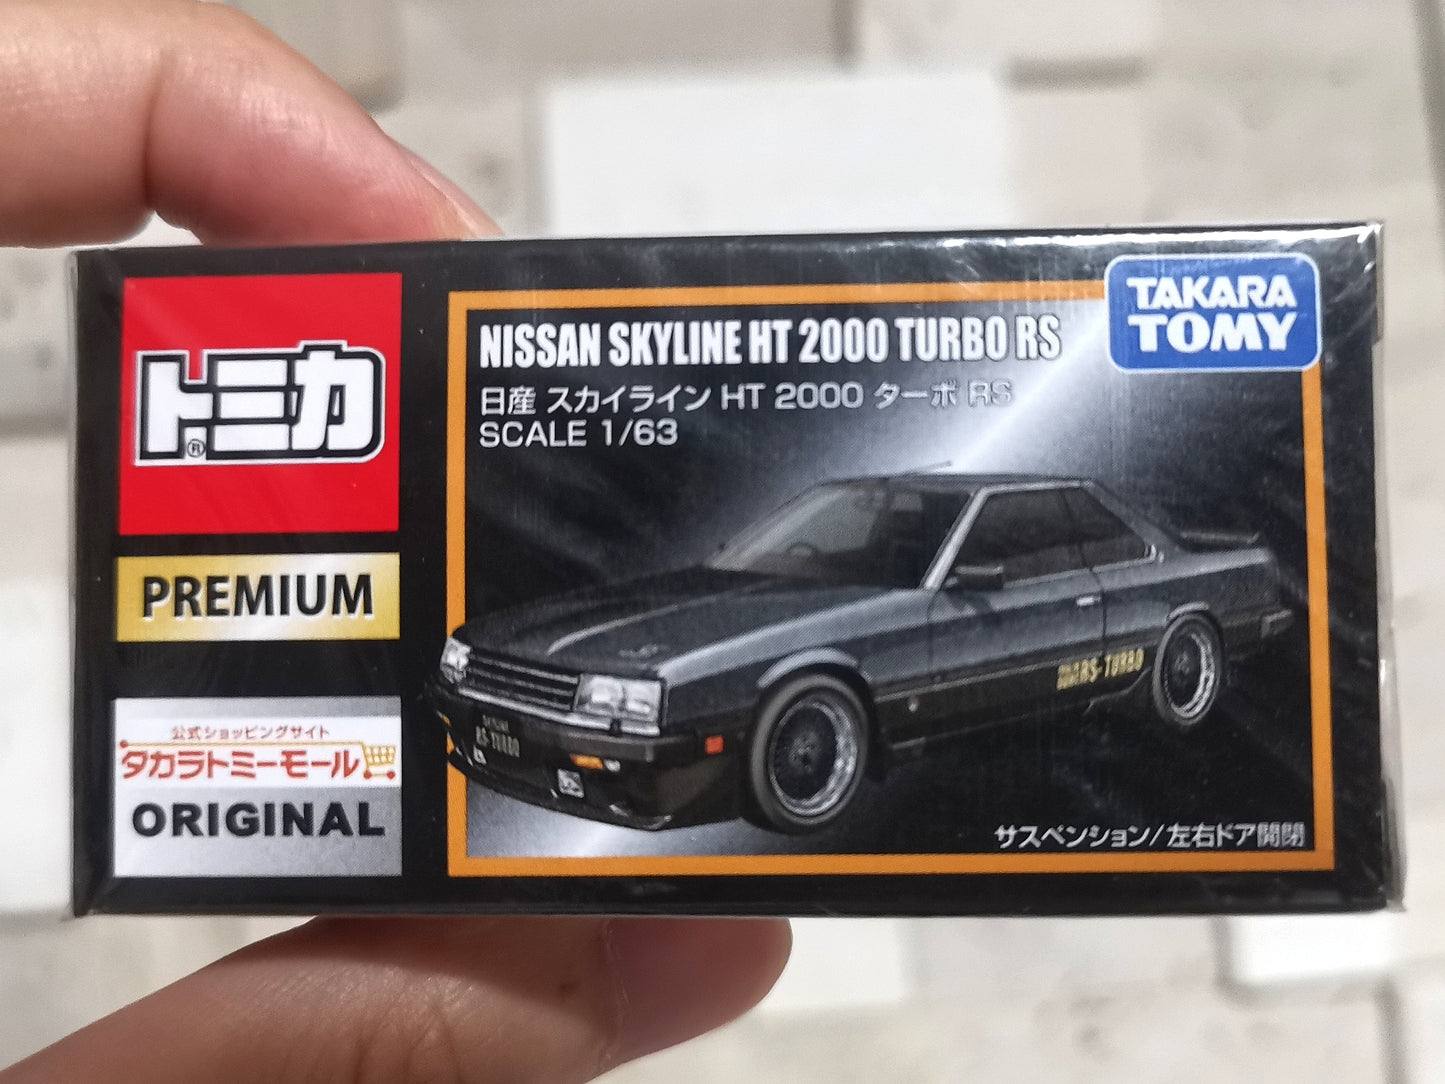 TOMICA PREMIUM Original Nissan Skyline HT 2000 Turbo RS 1:63 SCALE NEW IN Box